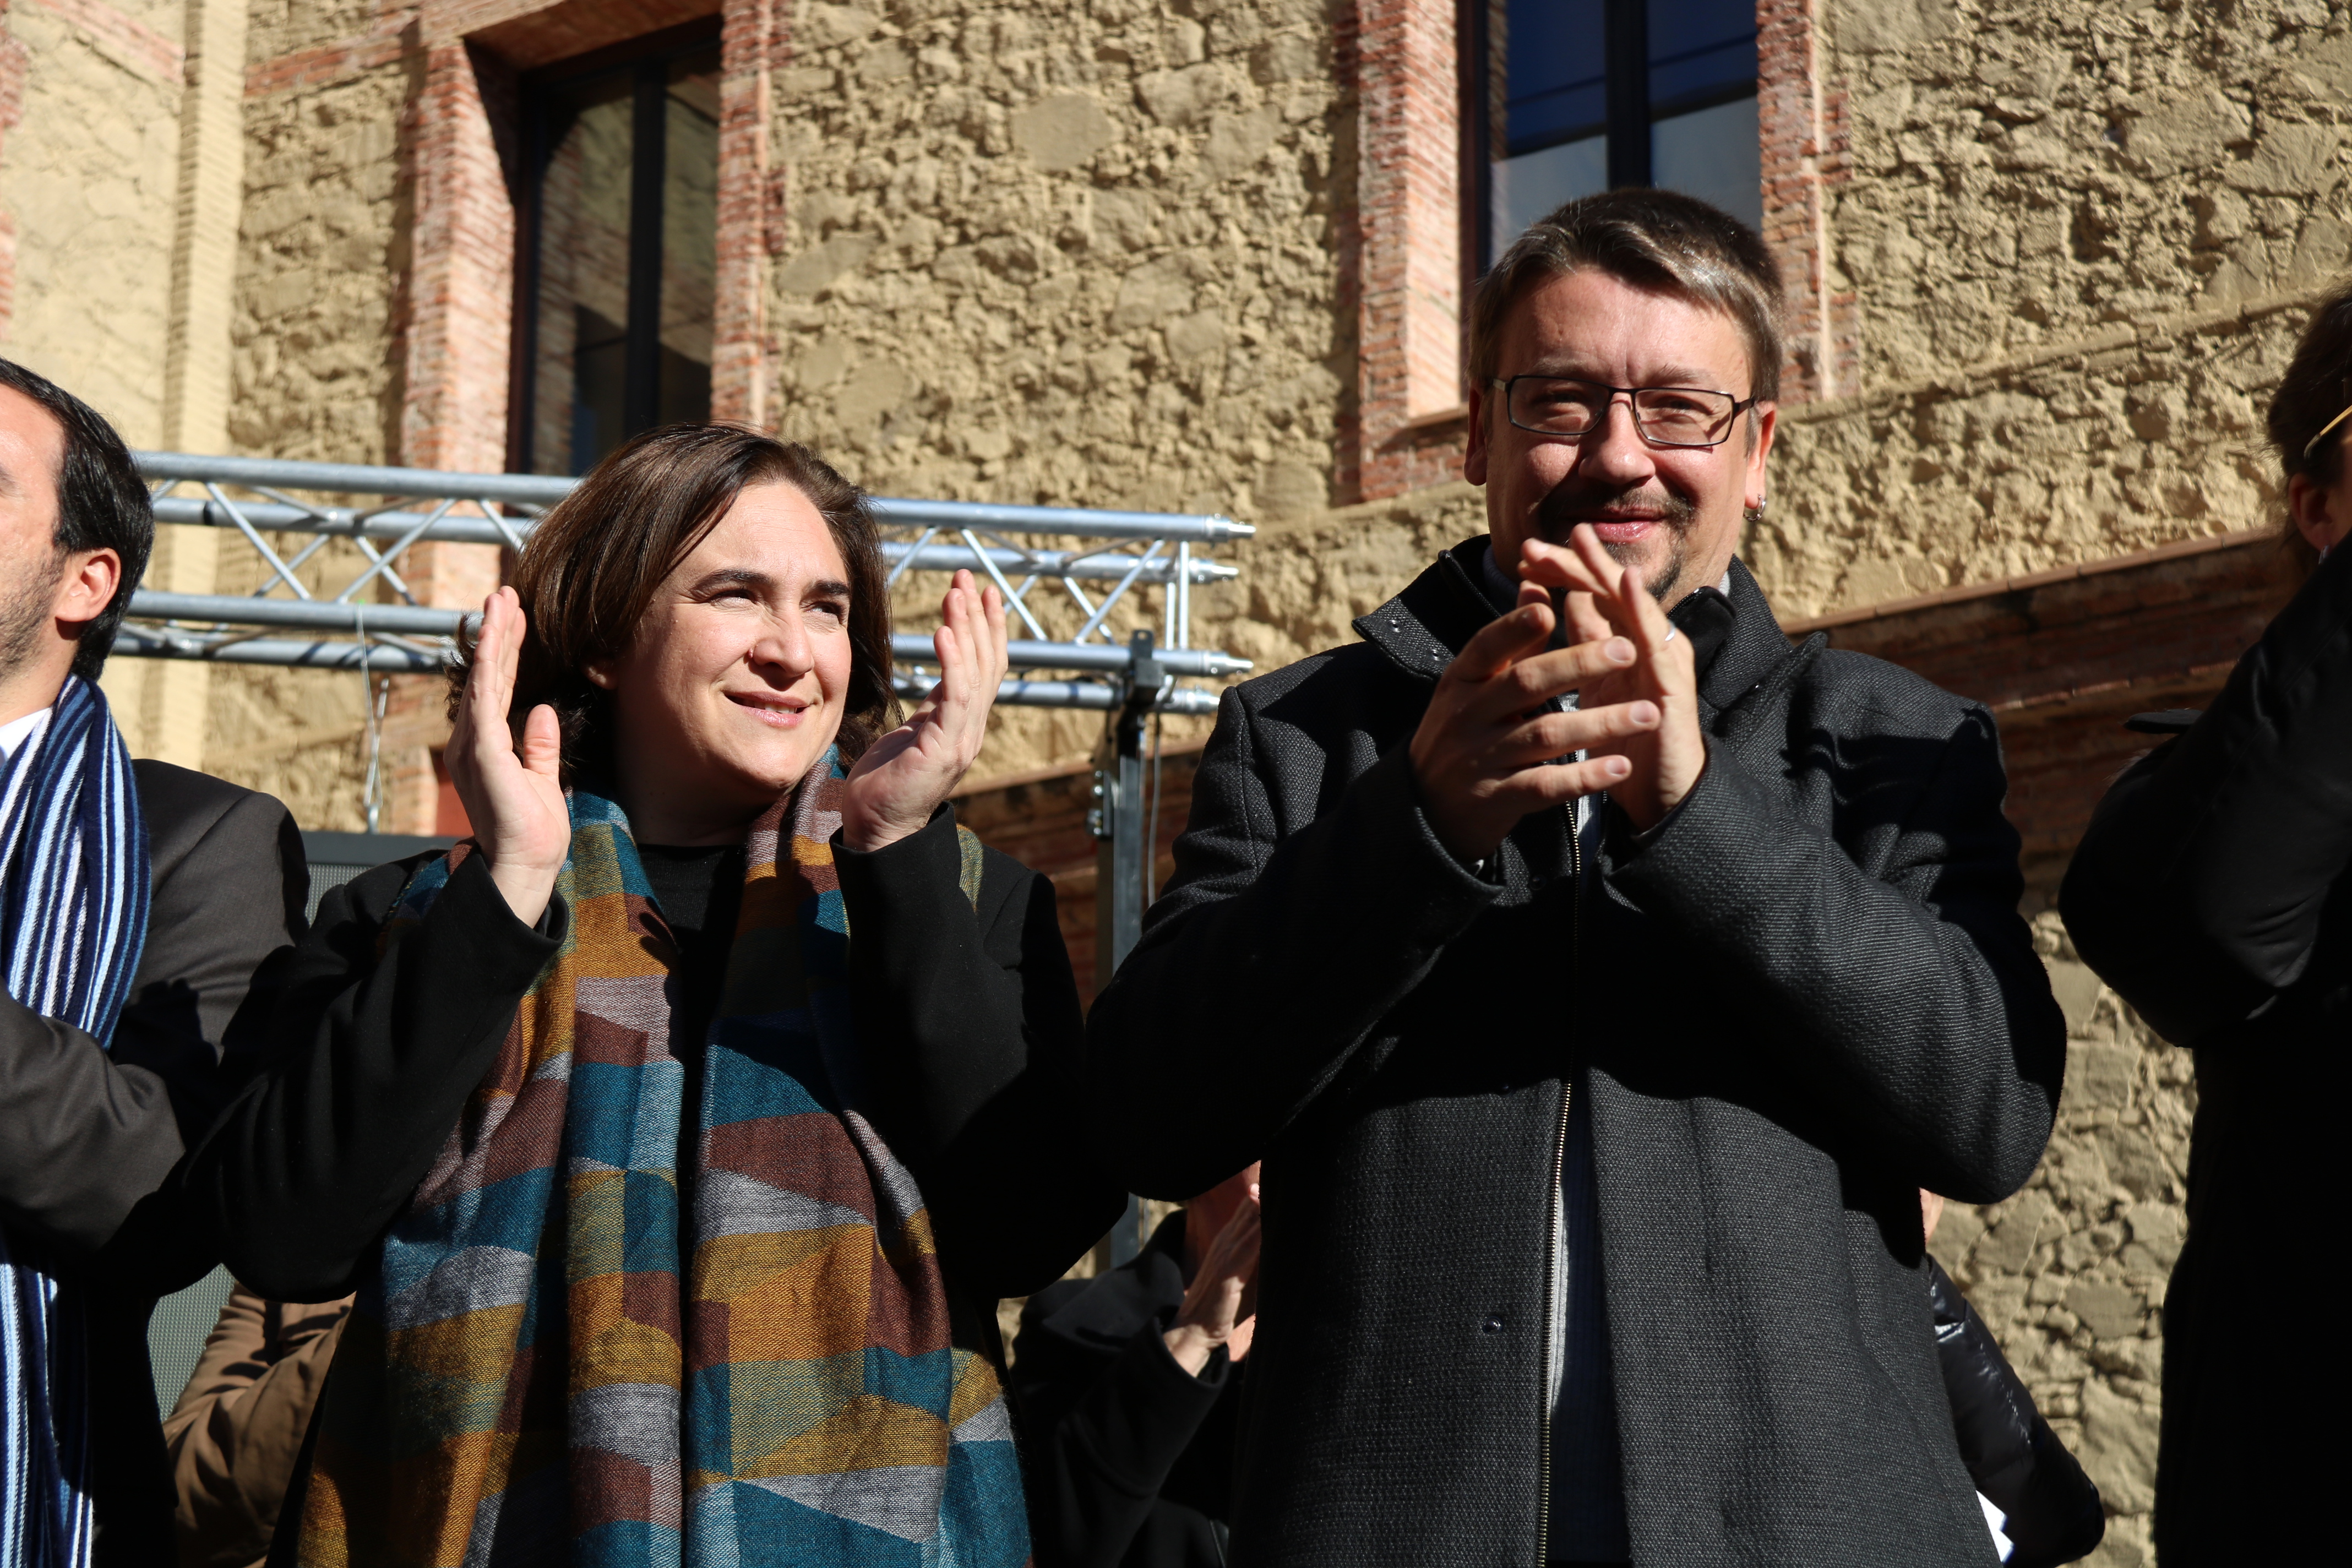 The Barcelona mayor, Ada Colau, alongside head of the Catalonia in Common list, Xavier Domènec h (by ACN)